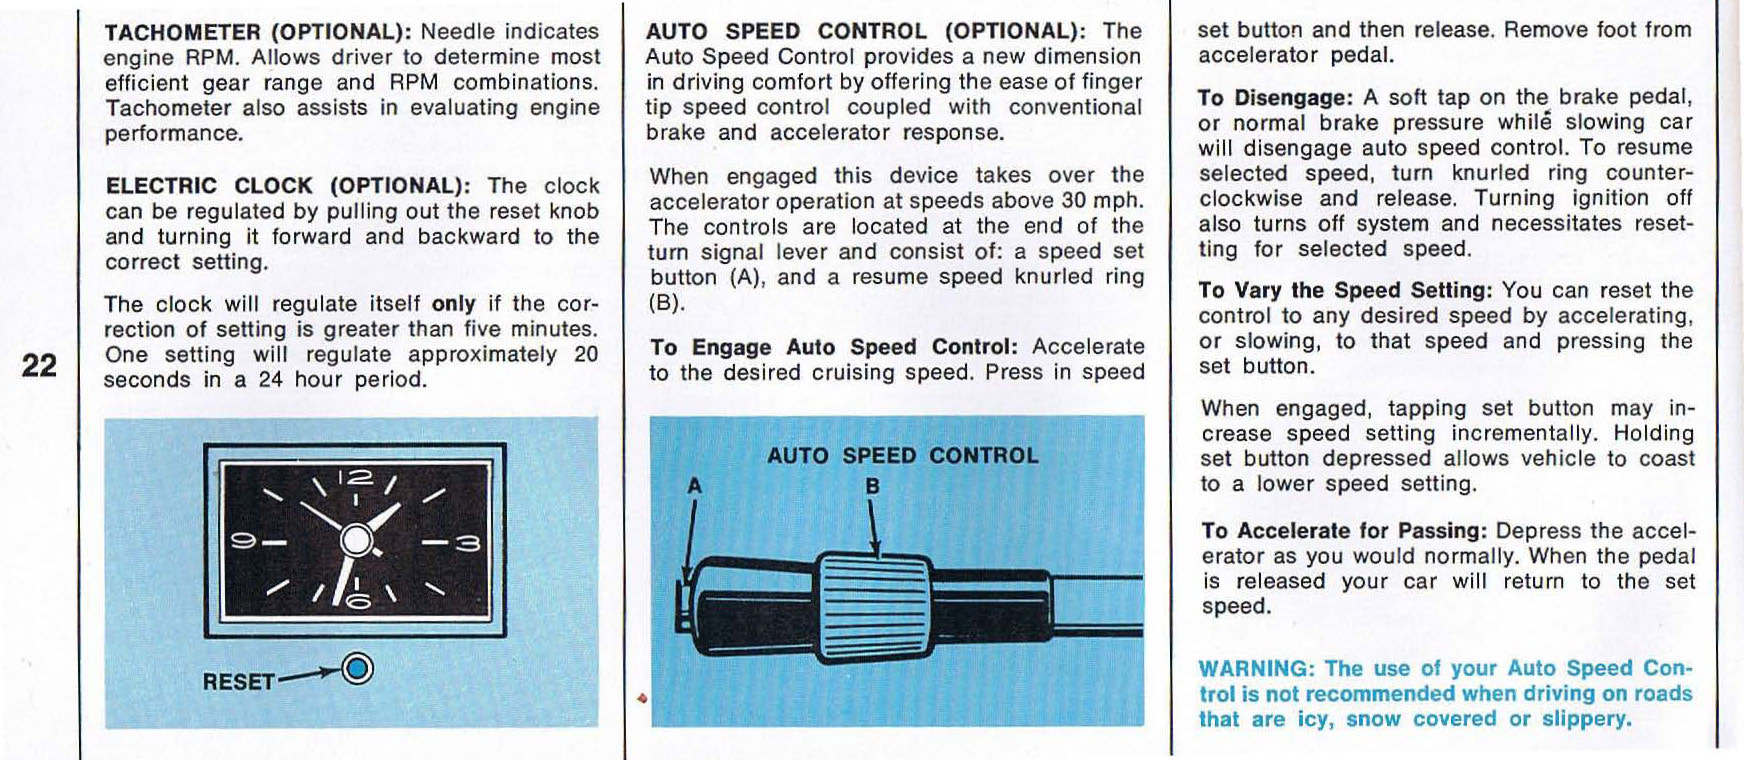 1969_Plymouth_Fury_Owners_Manual-22